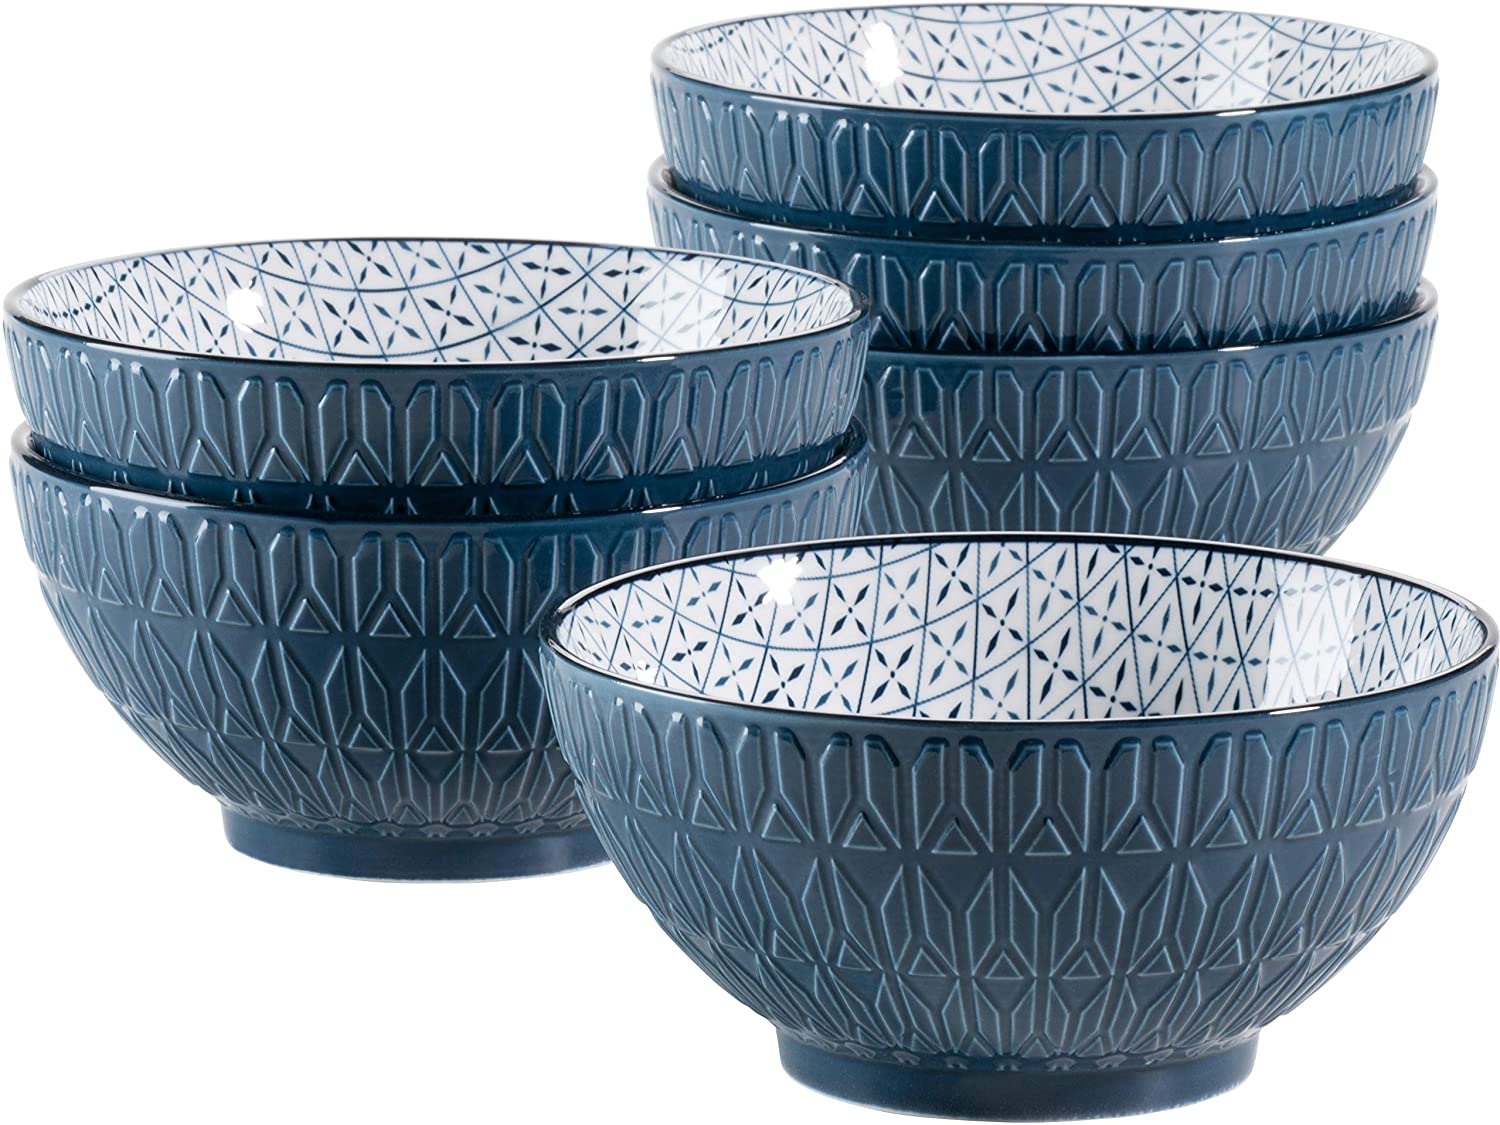 Maser MÄSER 931577 Series Telde Cereal Bowls Set in Catering Quality, 6 Bowls with Pretty Relief Surface and Glazed Decoration, Durable Porcelain, Blue